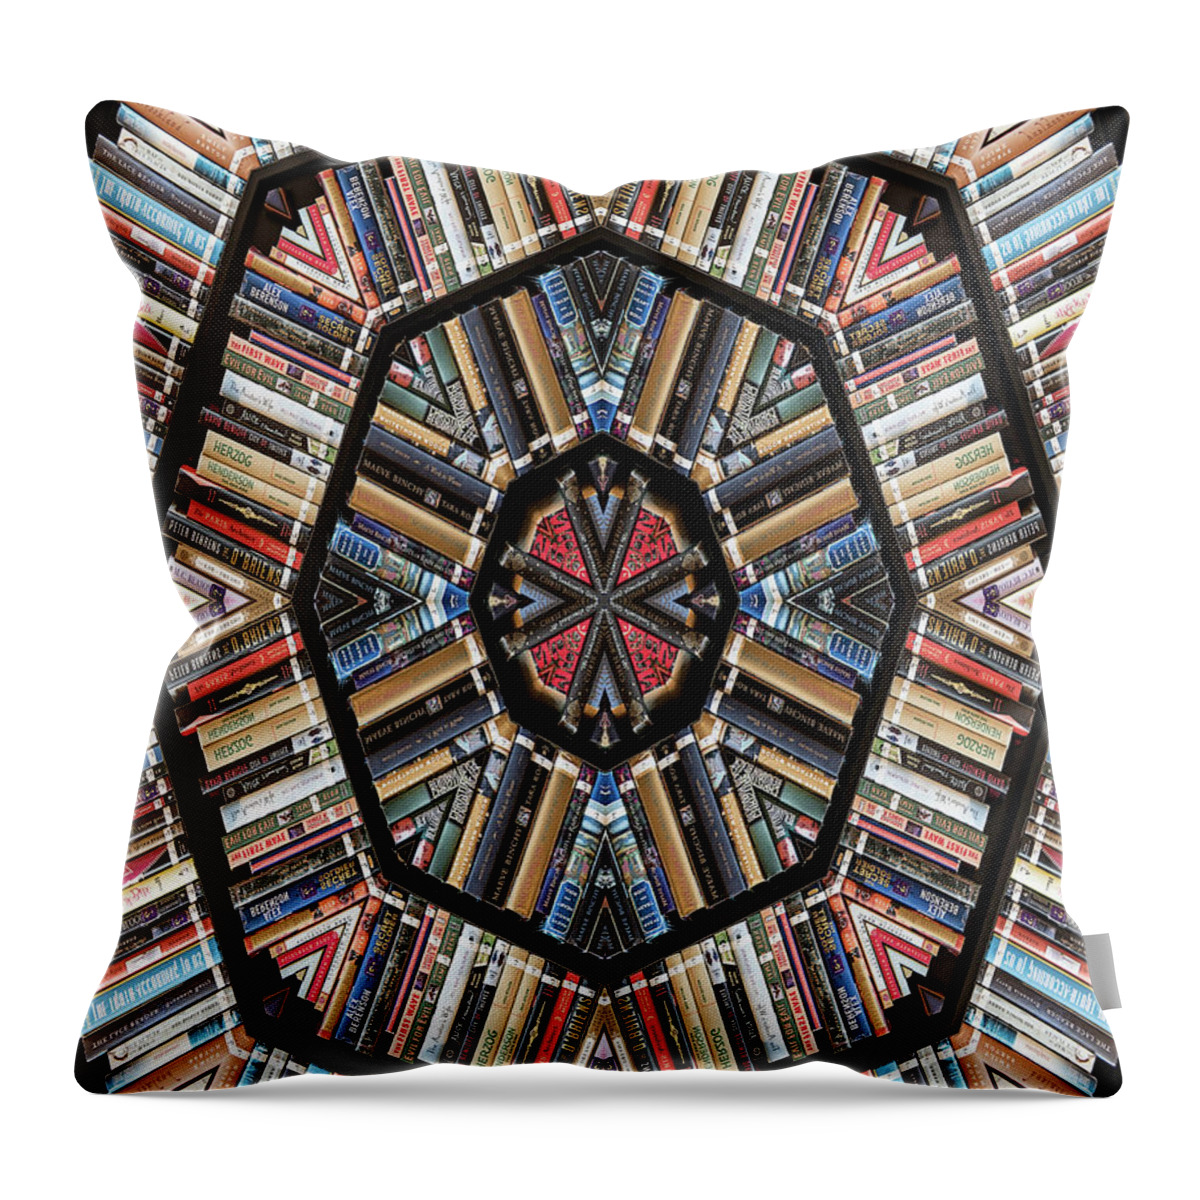 Books Throw Pillow featuring the photograph Library Kaleidoscope by Minnie Gallman